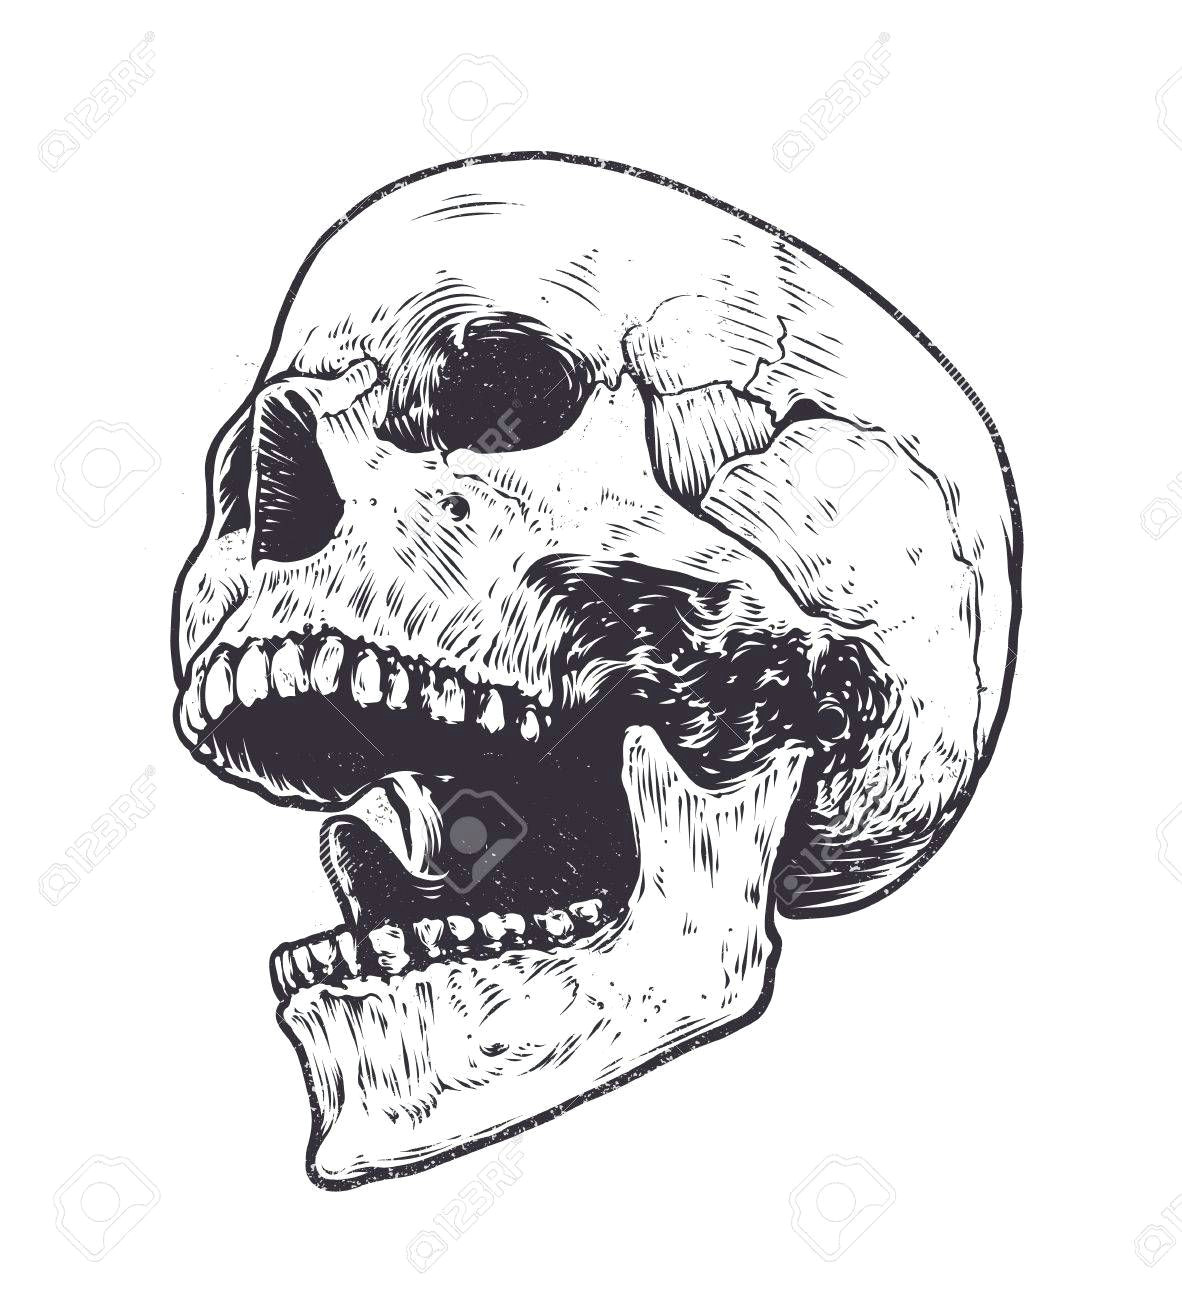 image result for skull open mouth drawing